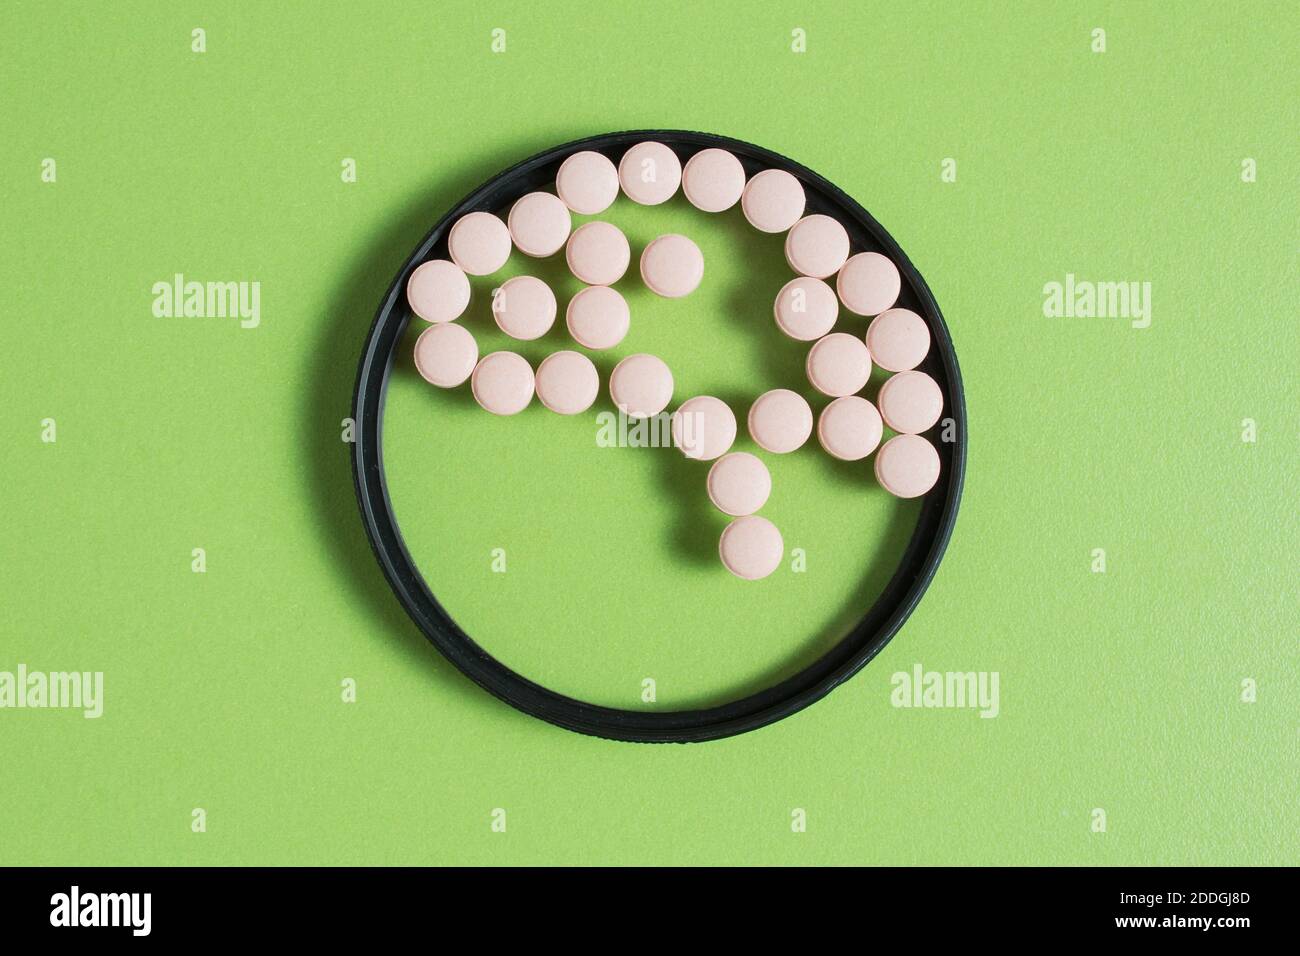 A brain made up of small round pills inside a circular lens on a green table. Health concept. Stock Photo